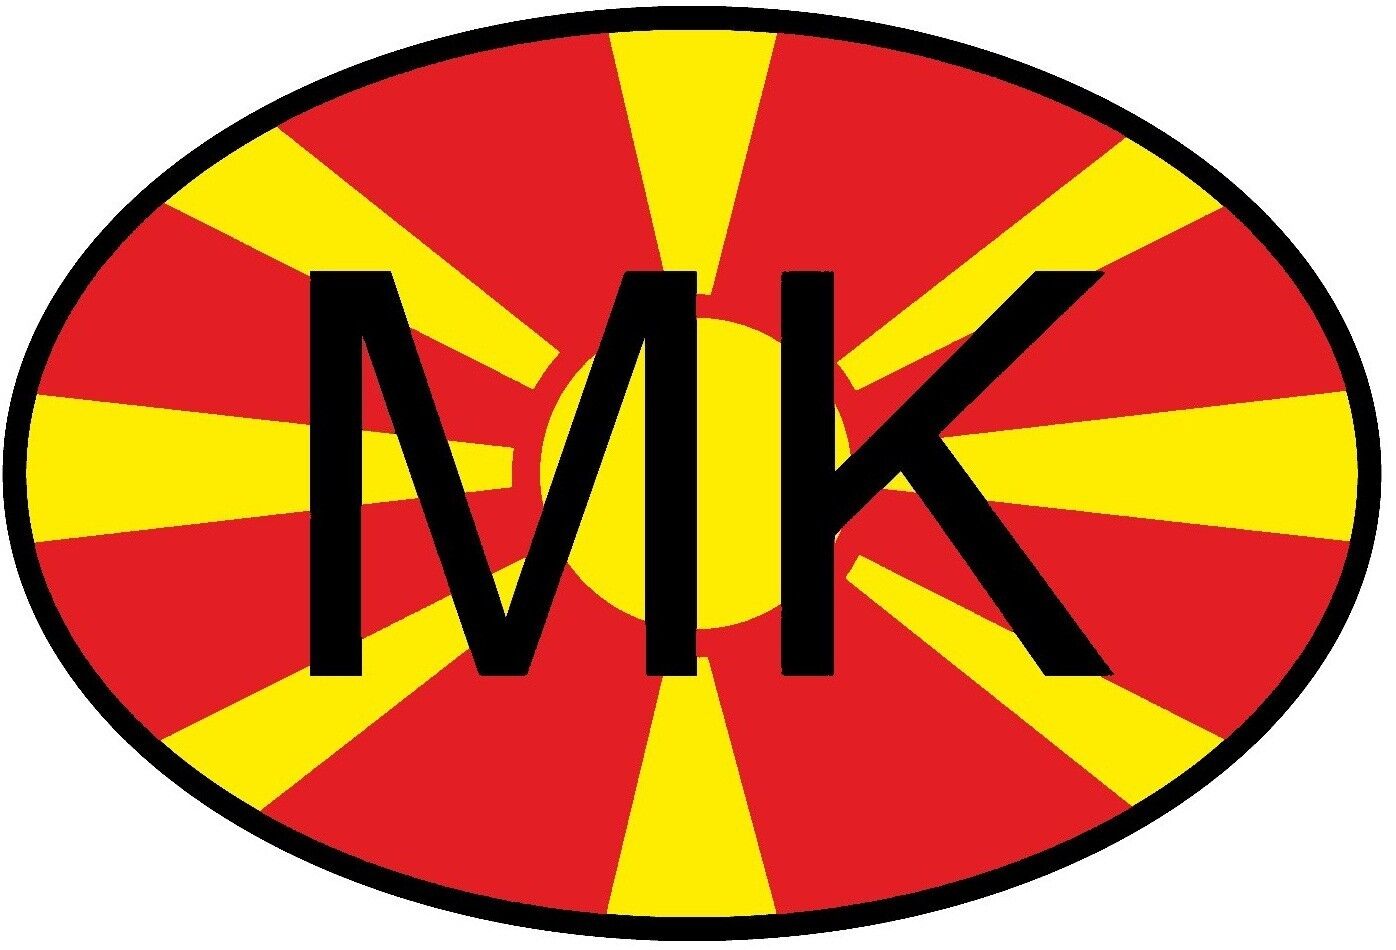 MK MACEDONIA COUNTRY CODE OVAL WITH FLAG STICKER / BUMPER STICKER 